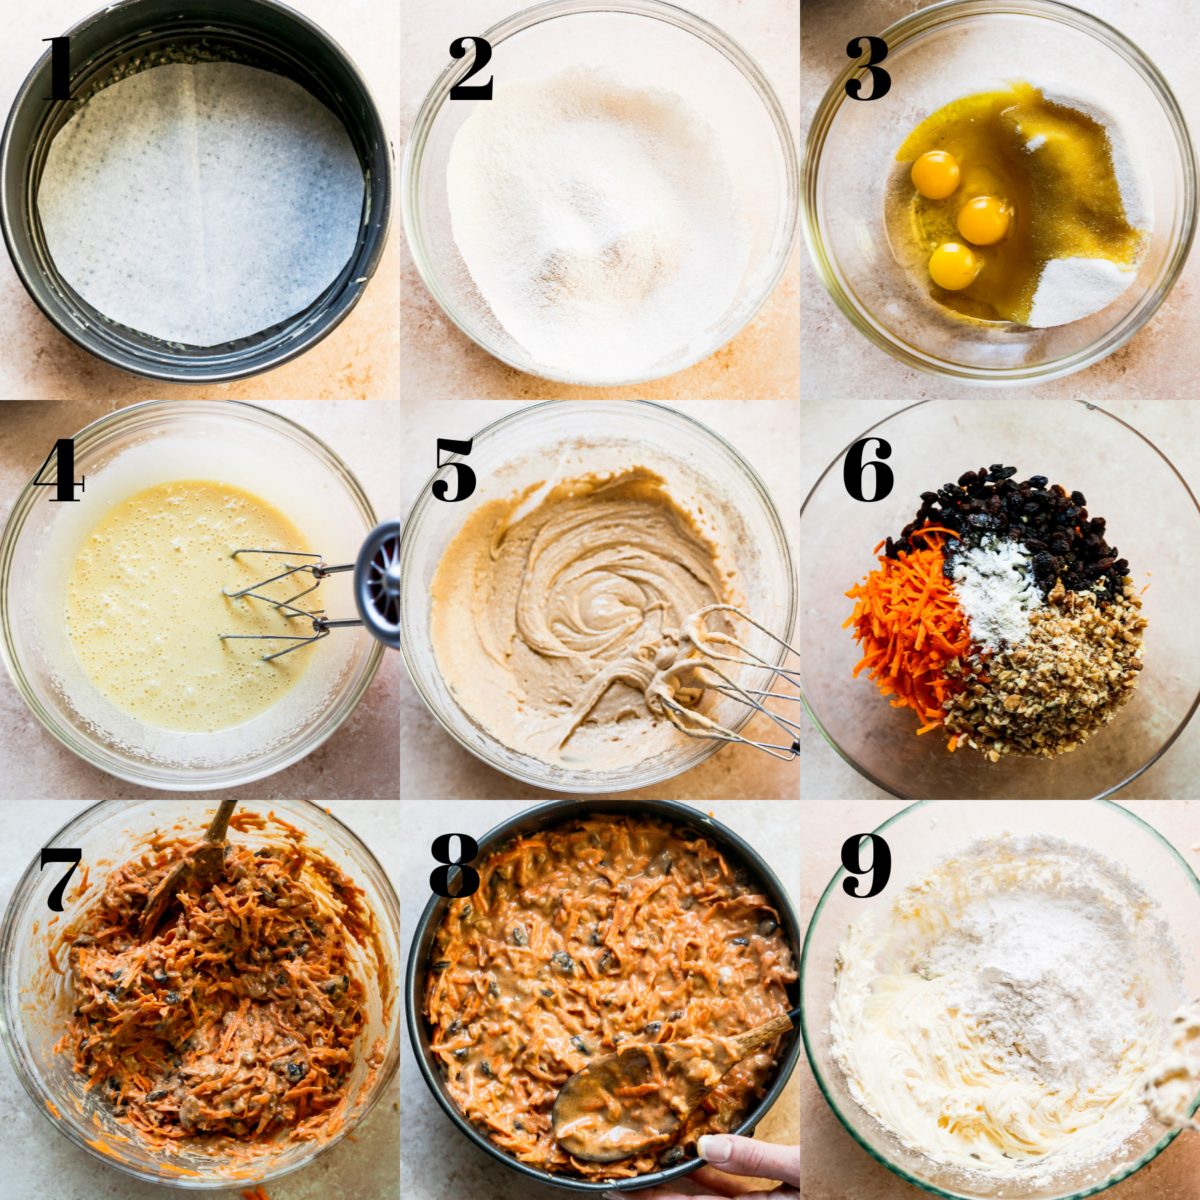 Step by step instructions with pictures of how to make carrot cake from scratch.